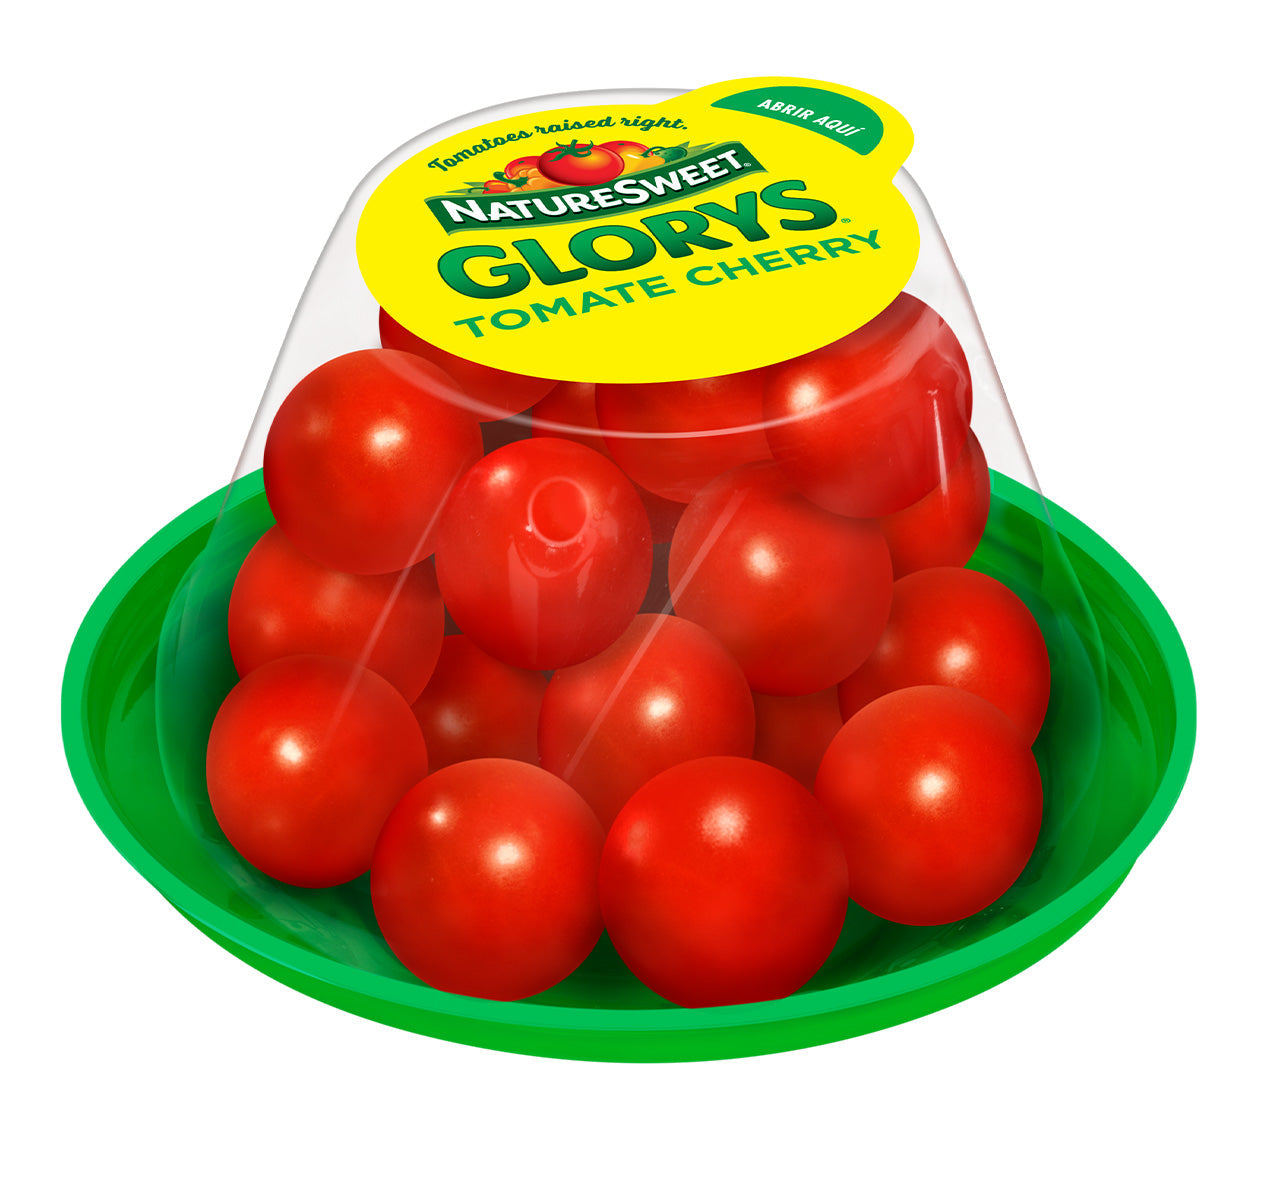 TOMATE CHERRY GLORYS NATURE SWEET CLAMSHELL 283  GR.